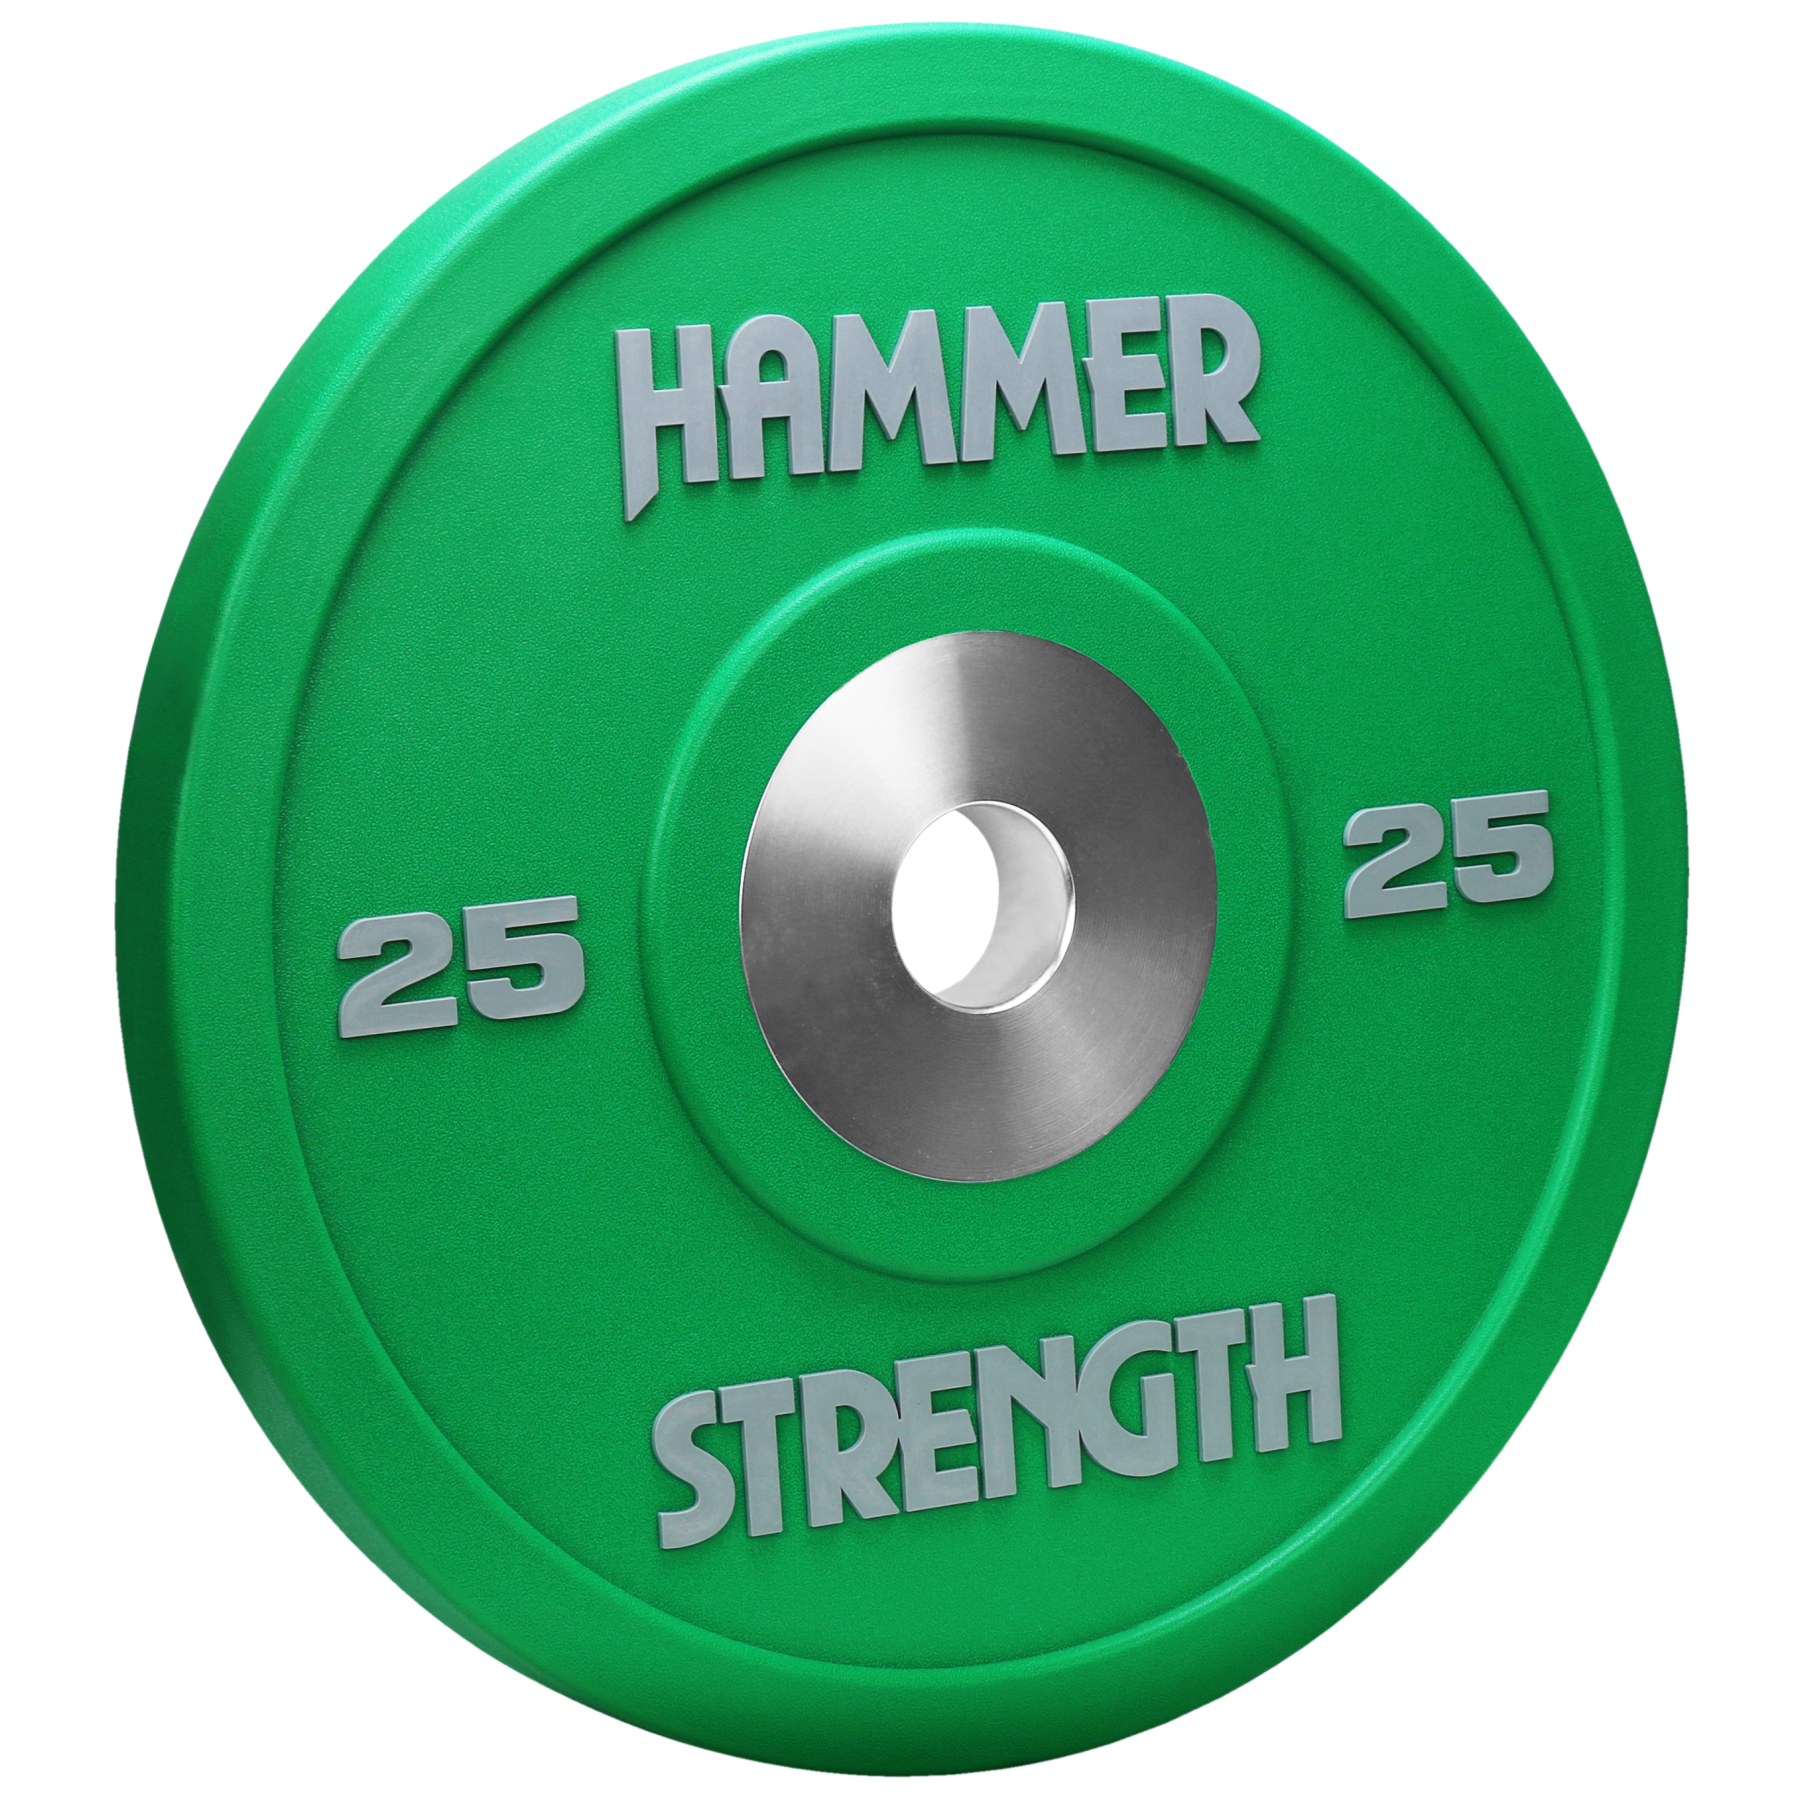 Hammer Strength Urethane Color Bumpers - 25 lbs, green